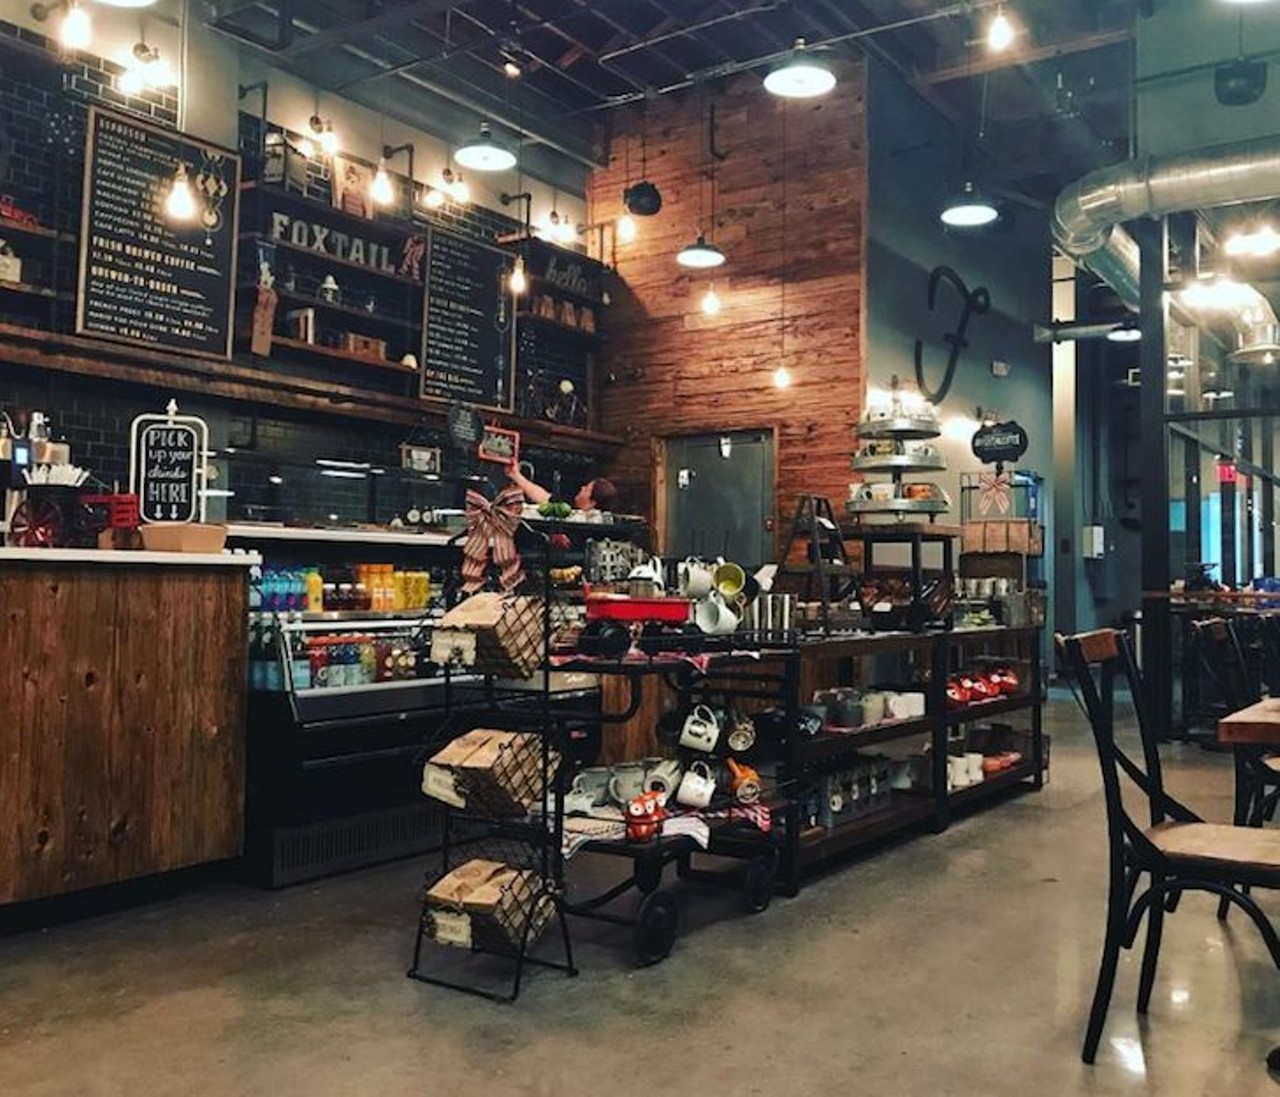 Foxtail Coffee Co. 
Address: 1282 N. Orange Ave., Winter Park, 407-951-7931 
From the tiniest cortadito to the showiest siphon brew, Foxtail imbues its coffee with an appropriate level of drama. It&#146;s reflected in the space &#150; between the exposed ductwork of the soaring ceiling and the polished concrete of the floor, Foxtail is appointed with marble counters, brass lighting fixtures, black subway tile, reclaimed barn wood, and a dozen other exquisite finishes and fixtures. Foxtail roasts their own beans, and they serve the expected espresso drinks, as well as cold brew, pour-overs, presses and siphons; less expectedly, they offer as many as six different cold brews on tap, with at least one nitro at all times. 
Photo via foxtailcoffeeco/Instagram